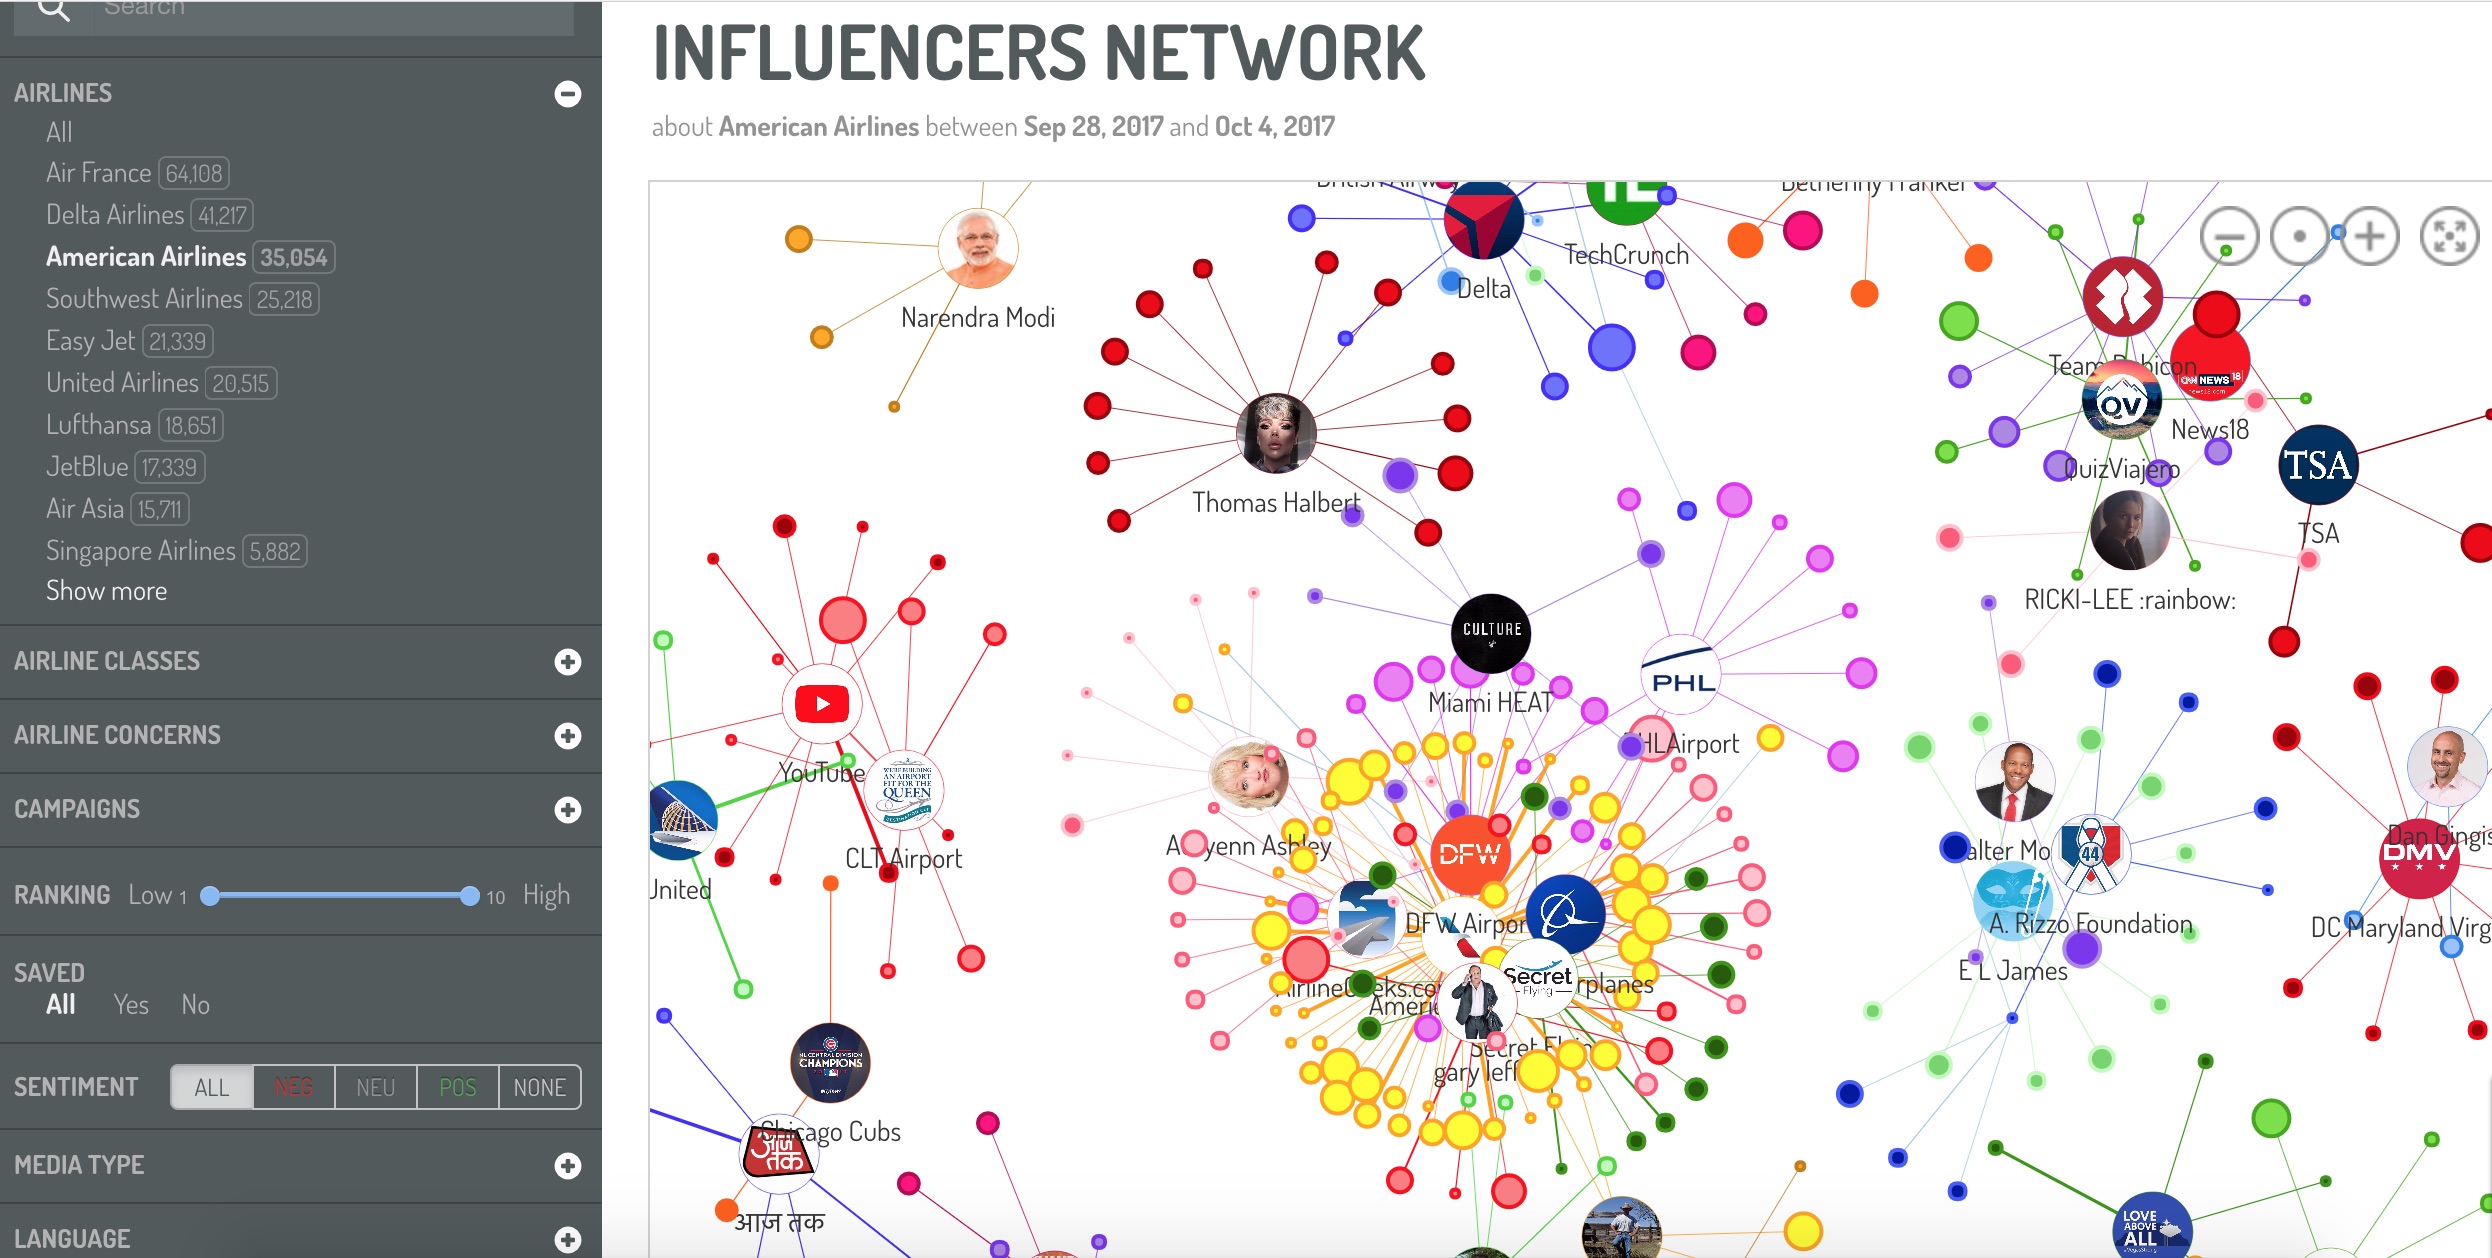 Influencers network